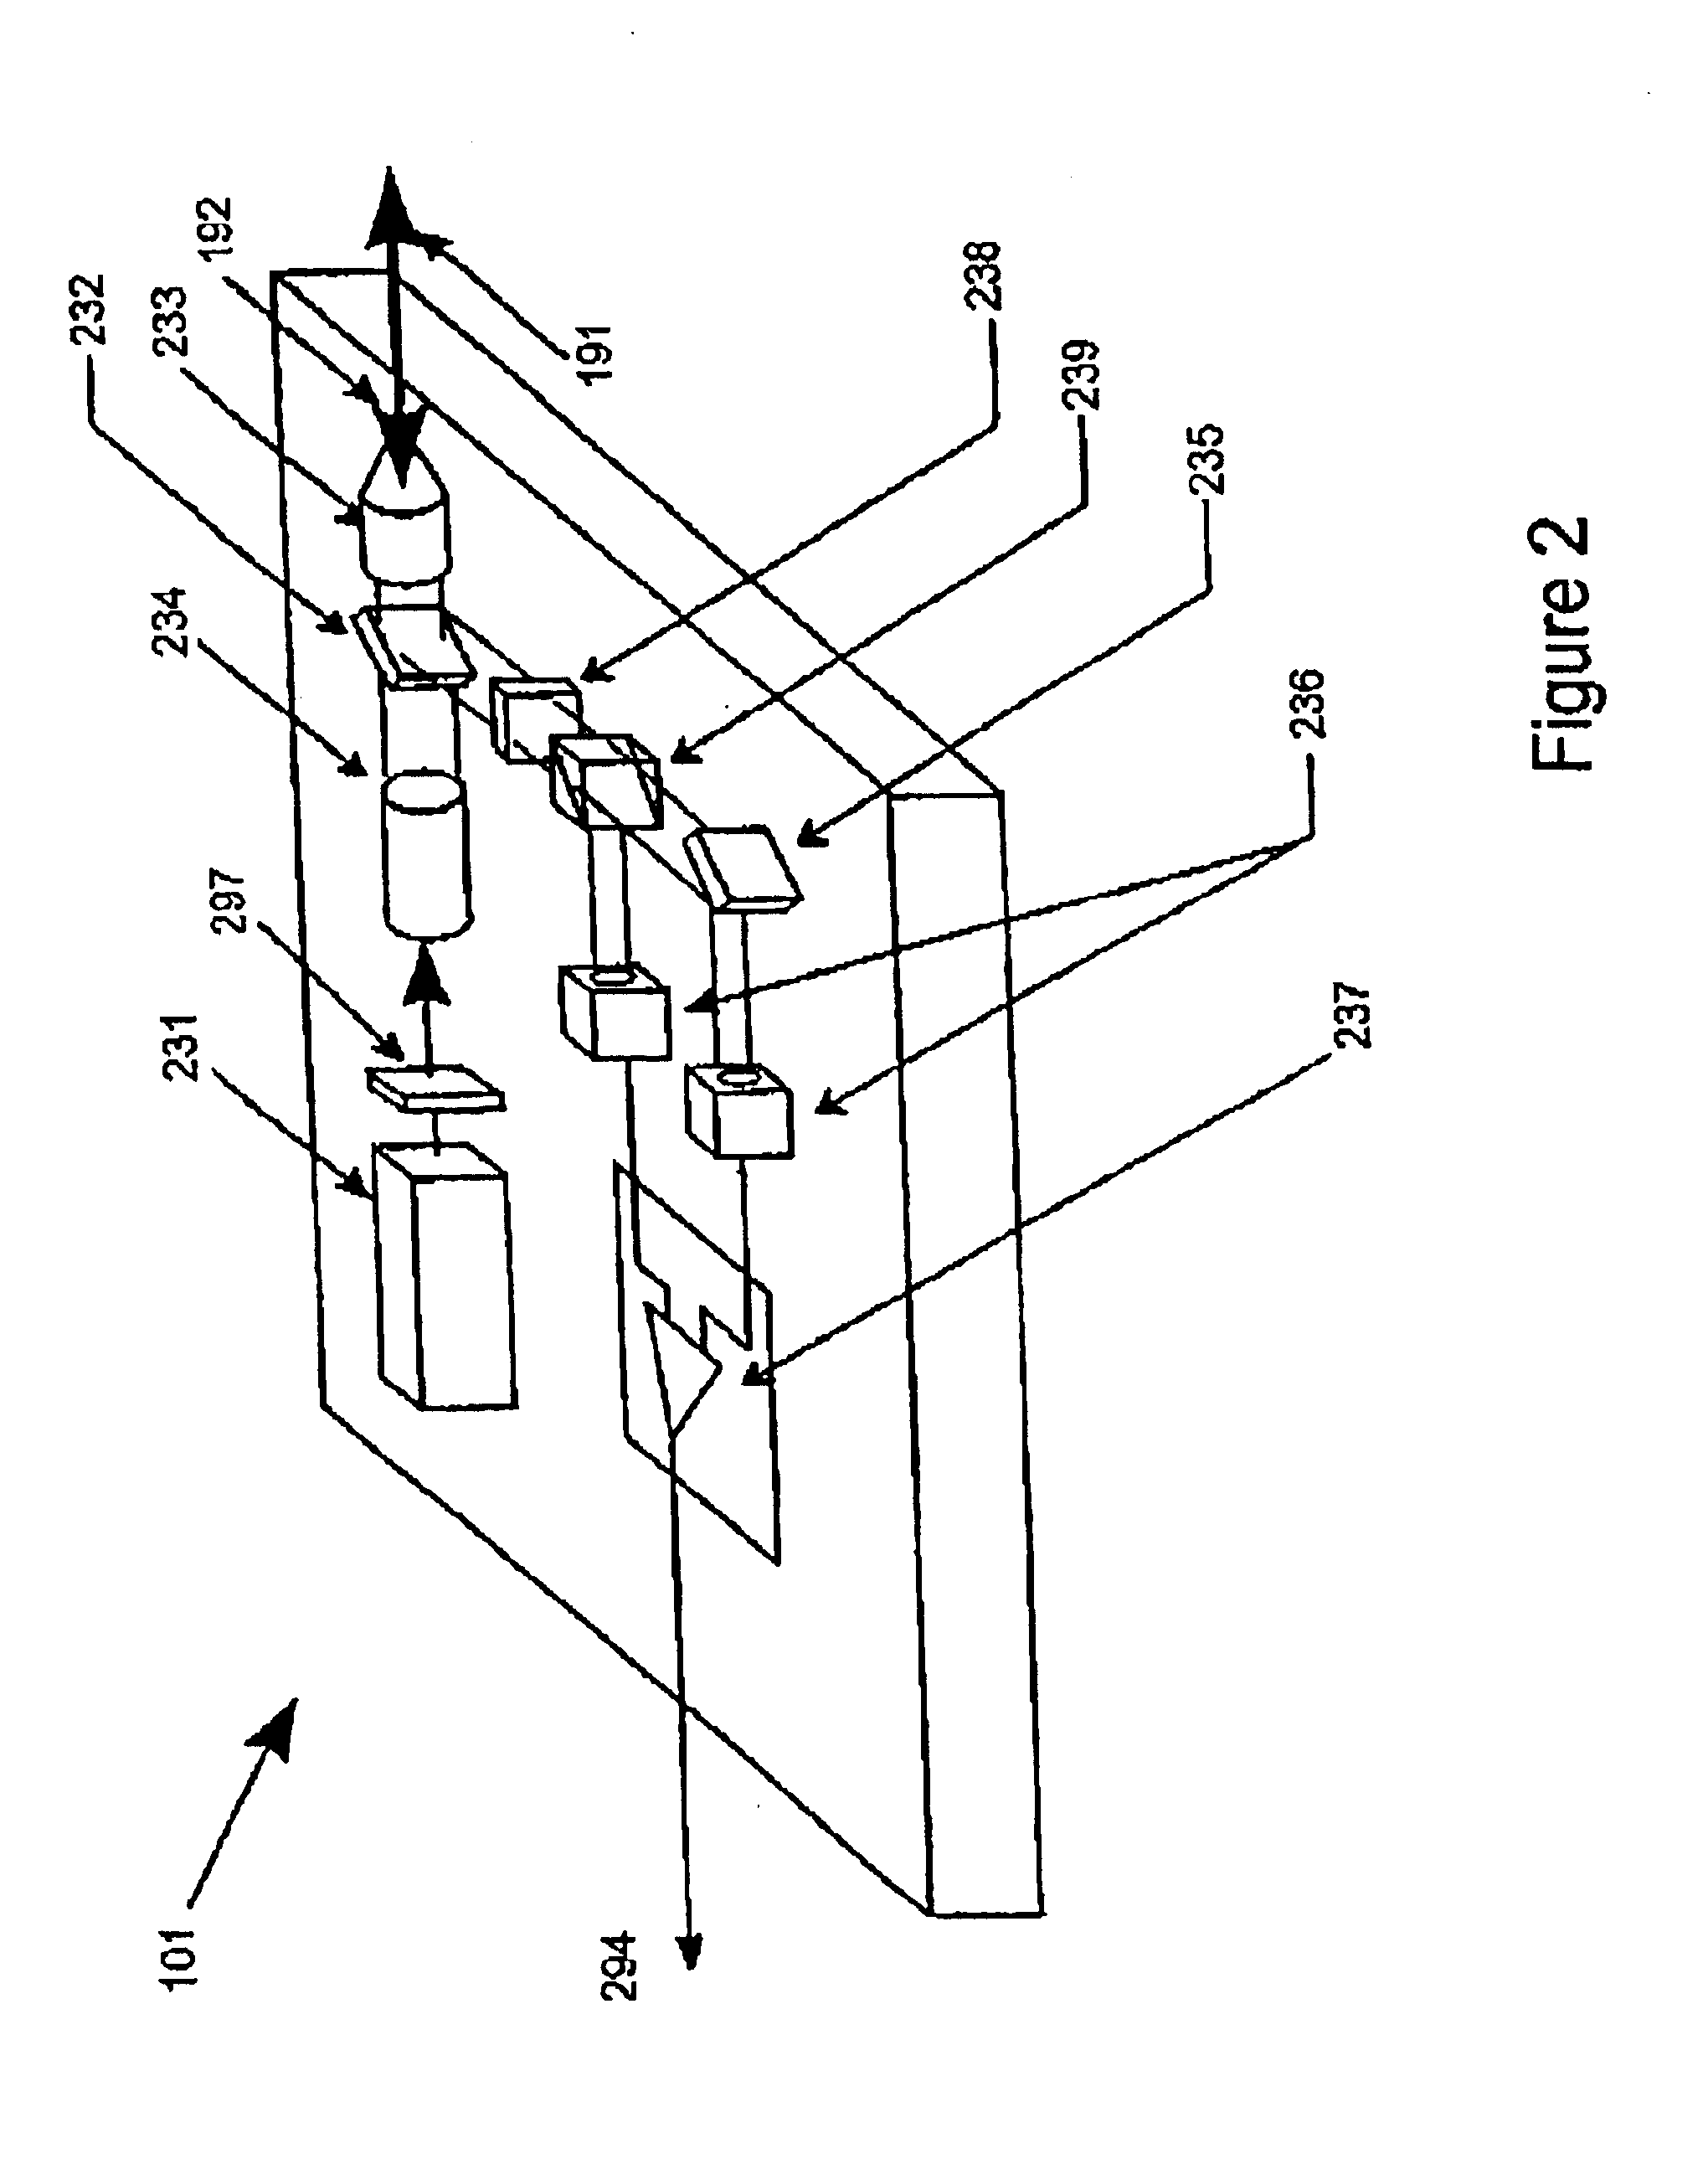 Single frequency laser source for optical data storage system